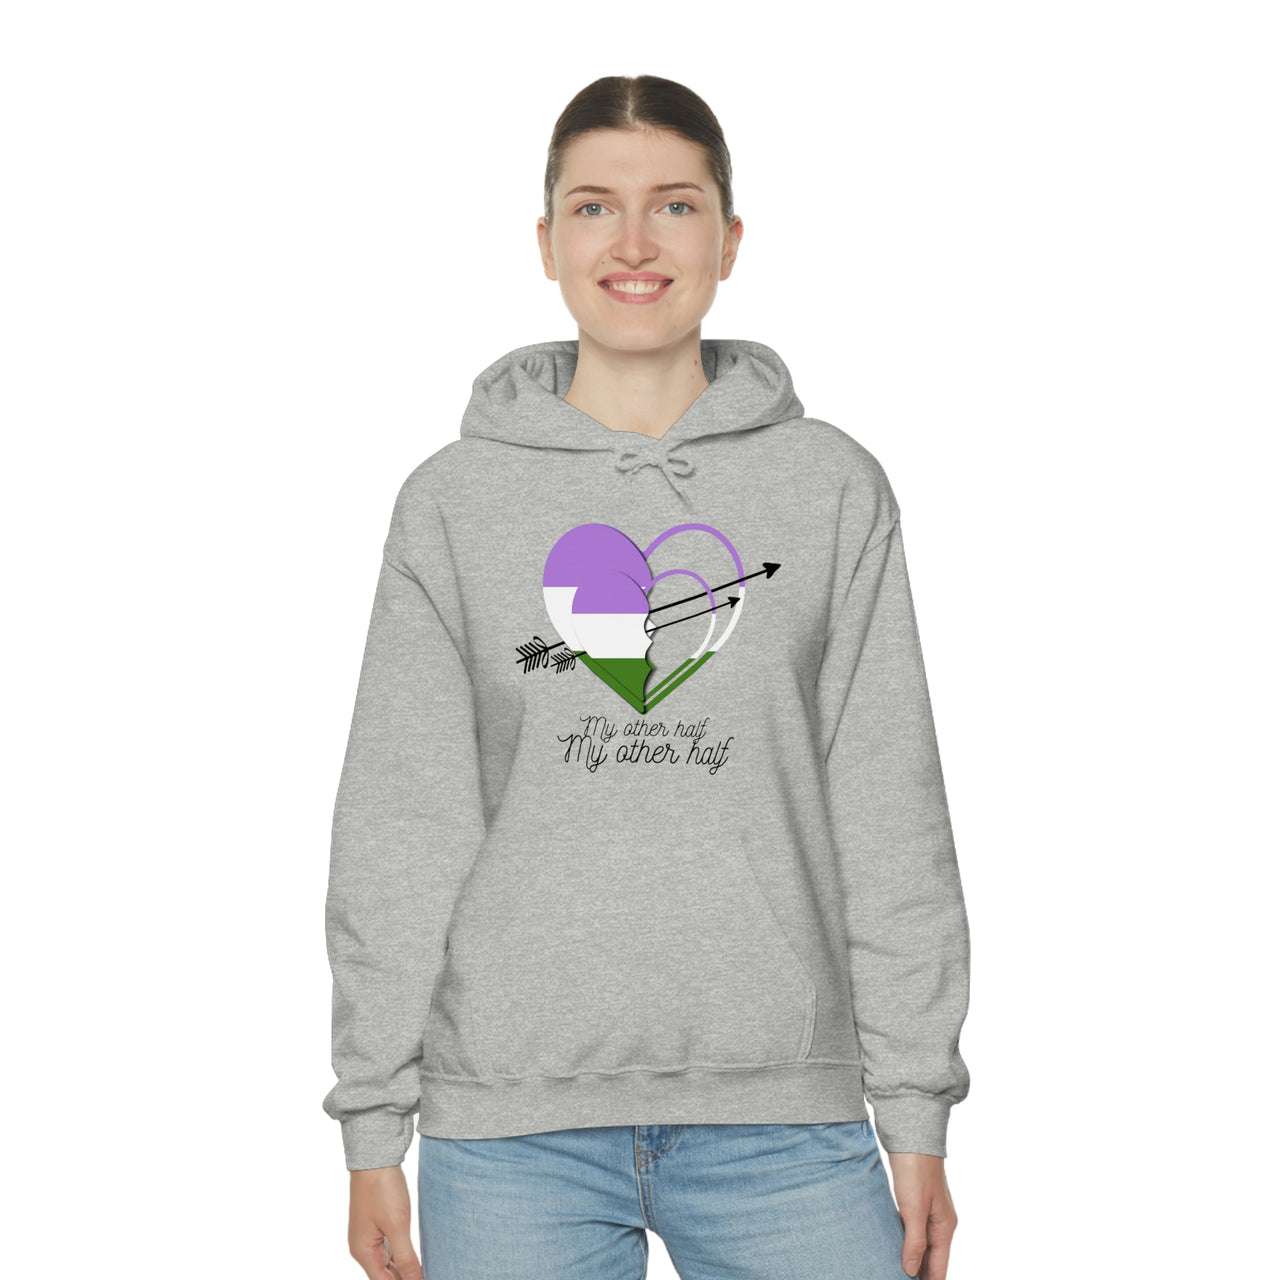 Genderqueer  Flag LGBTQ Affirmation Hoodie Unisex Size - The Other Half Printify